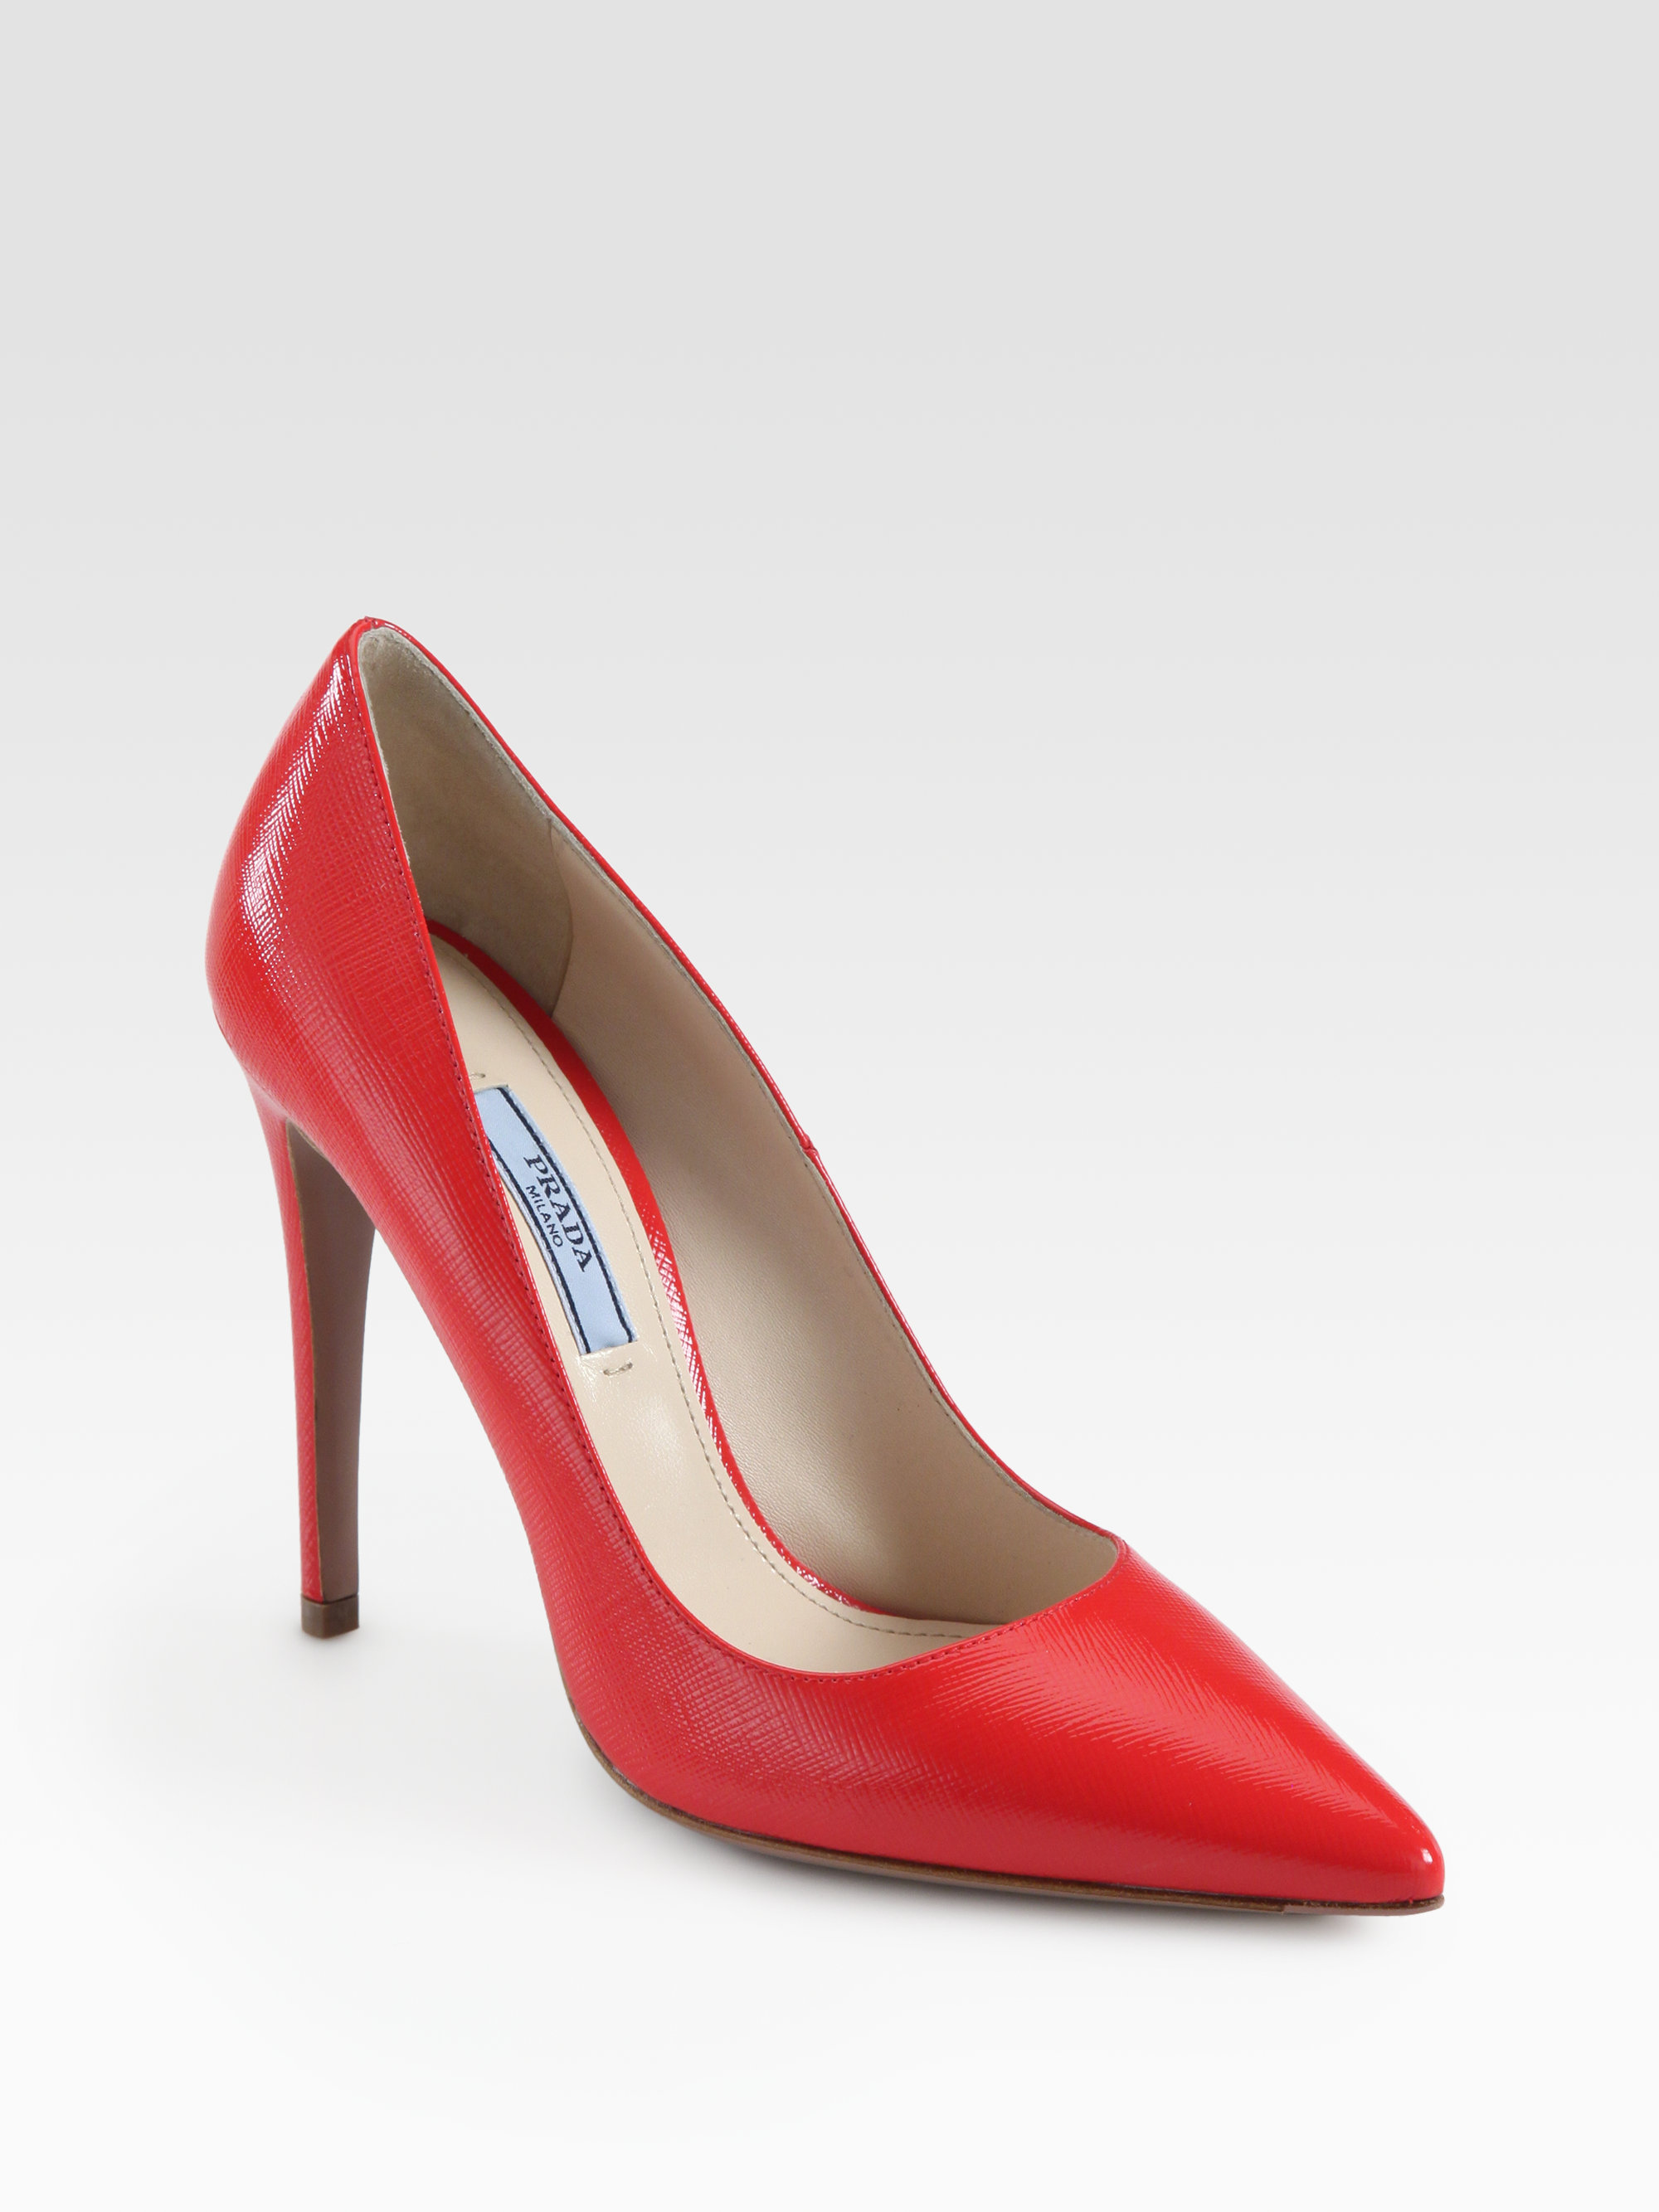 Prada Saffiano Leather Pumps in Red - Lyst